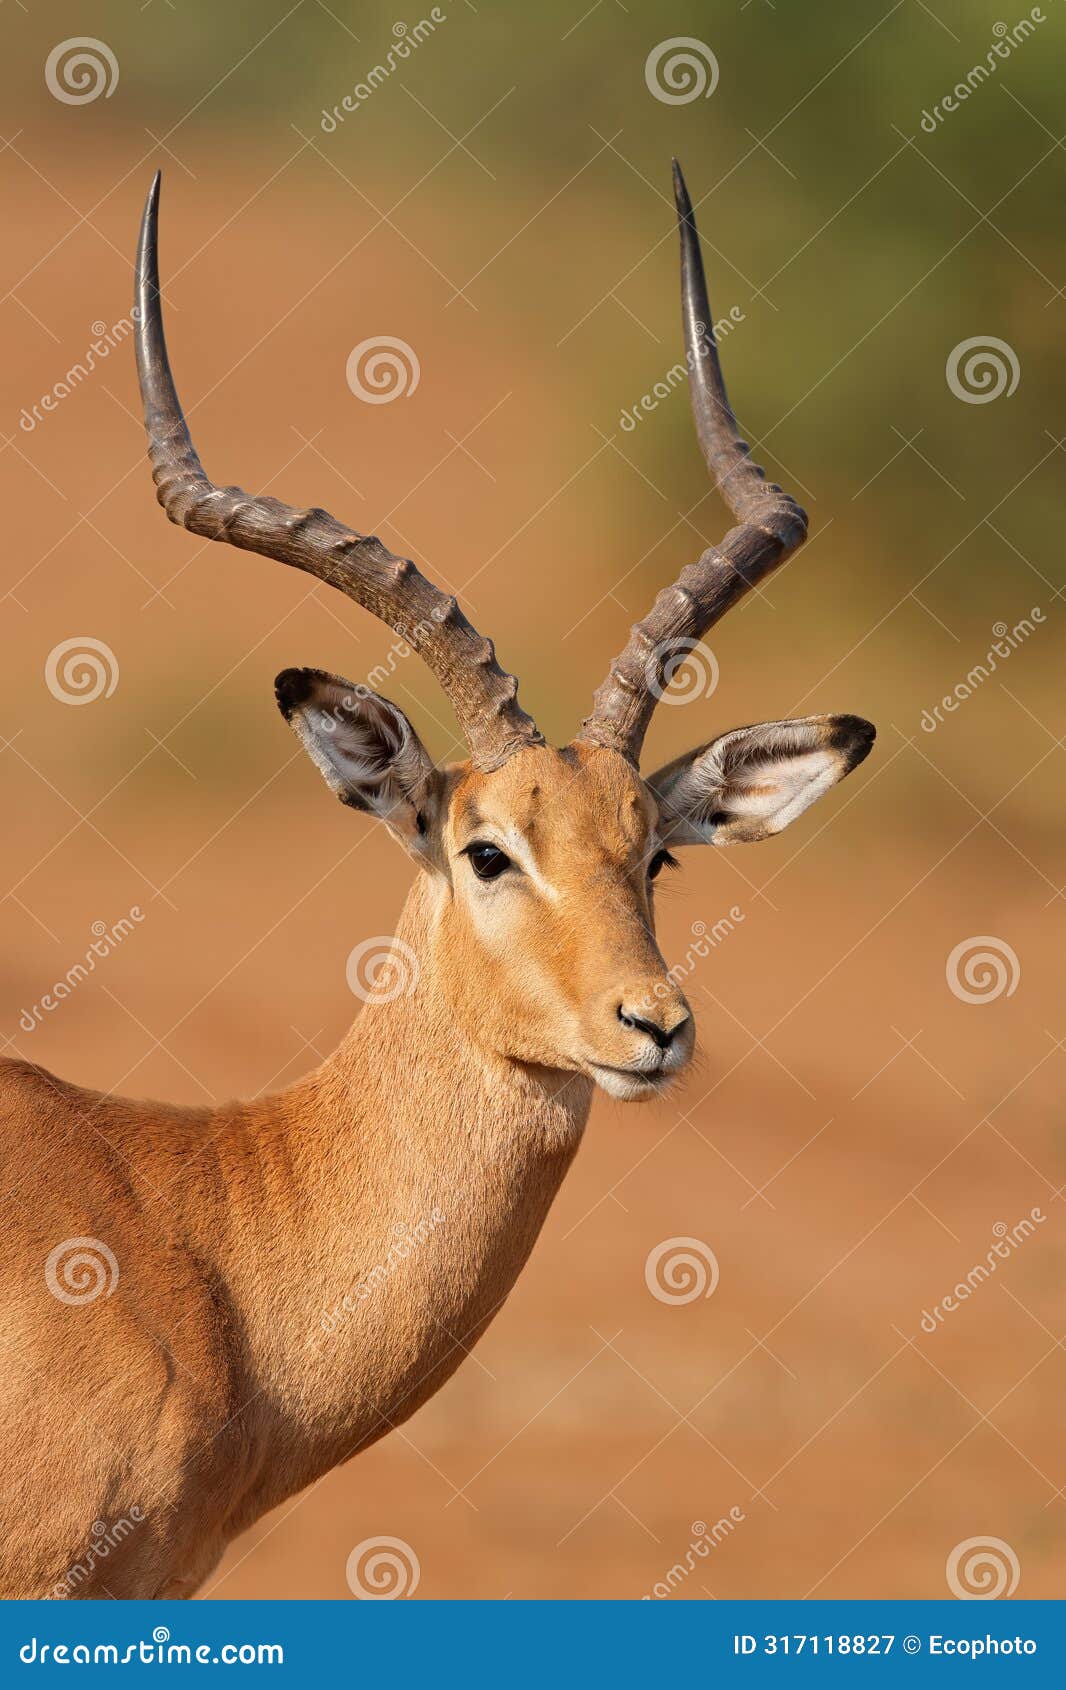 portrait of a male impala antelope, kruger national park, south africa